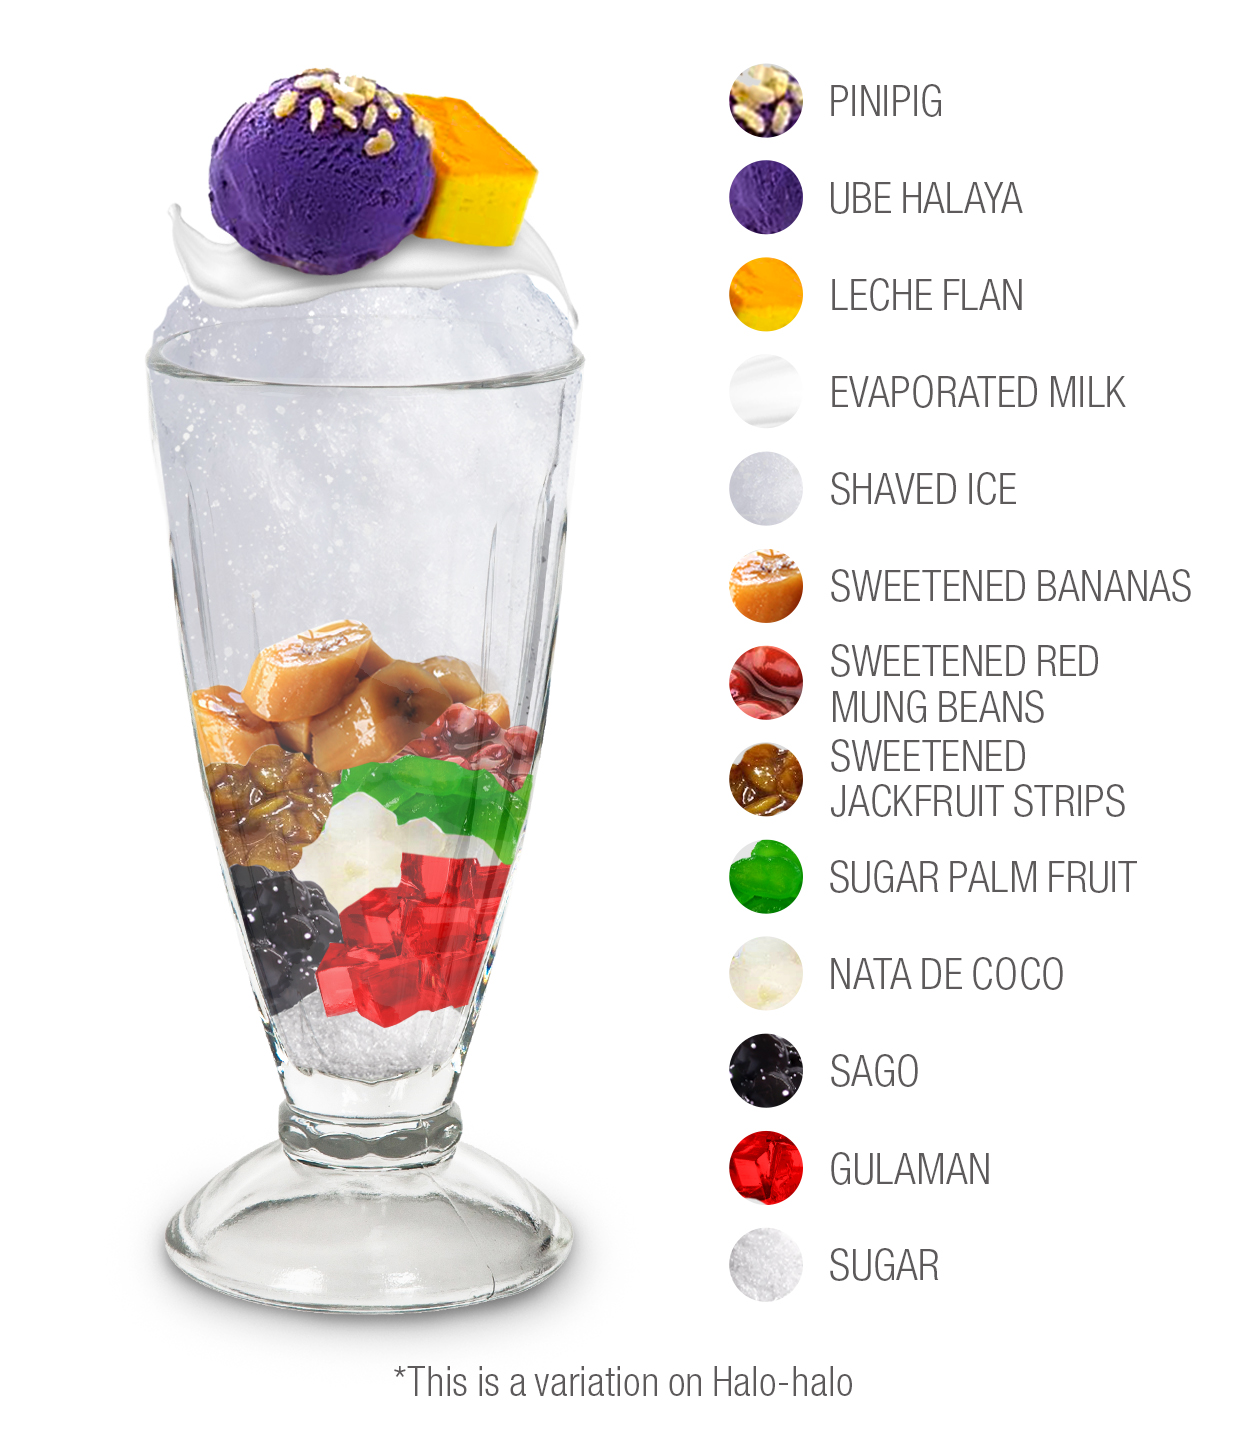 What does the picture halo halo represent Information